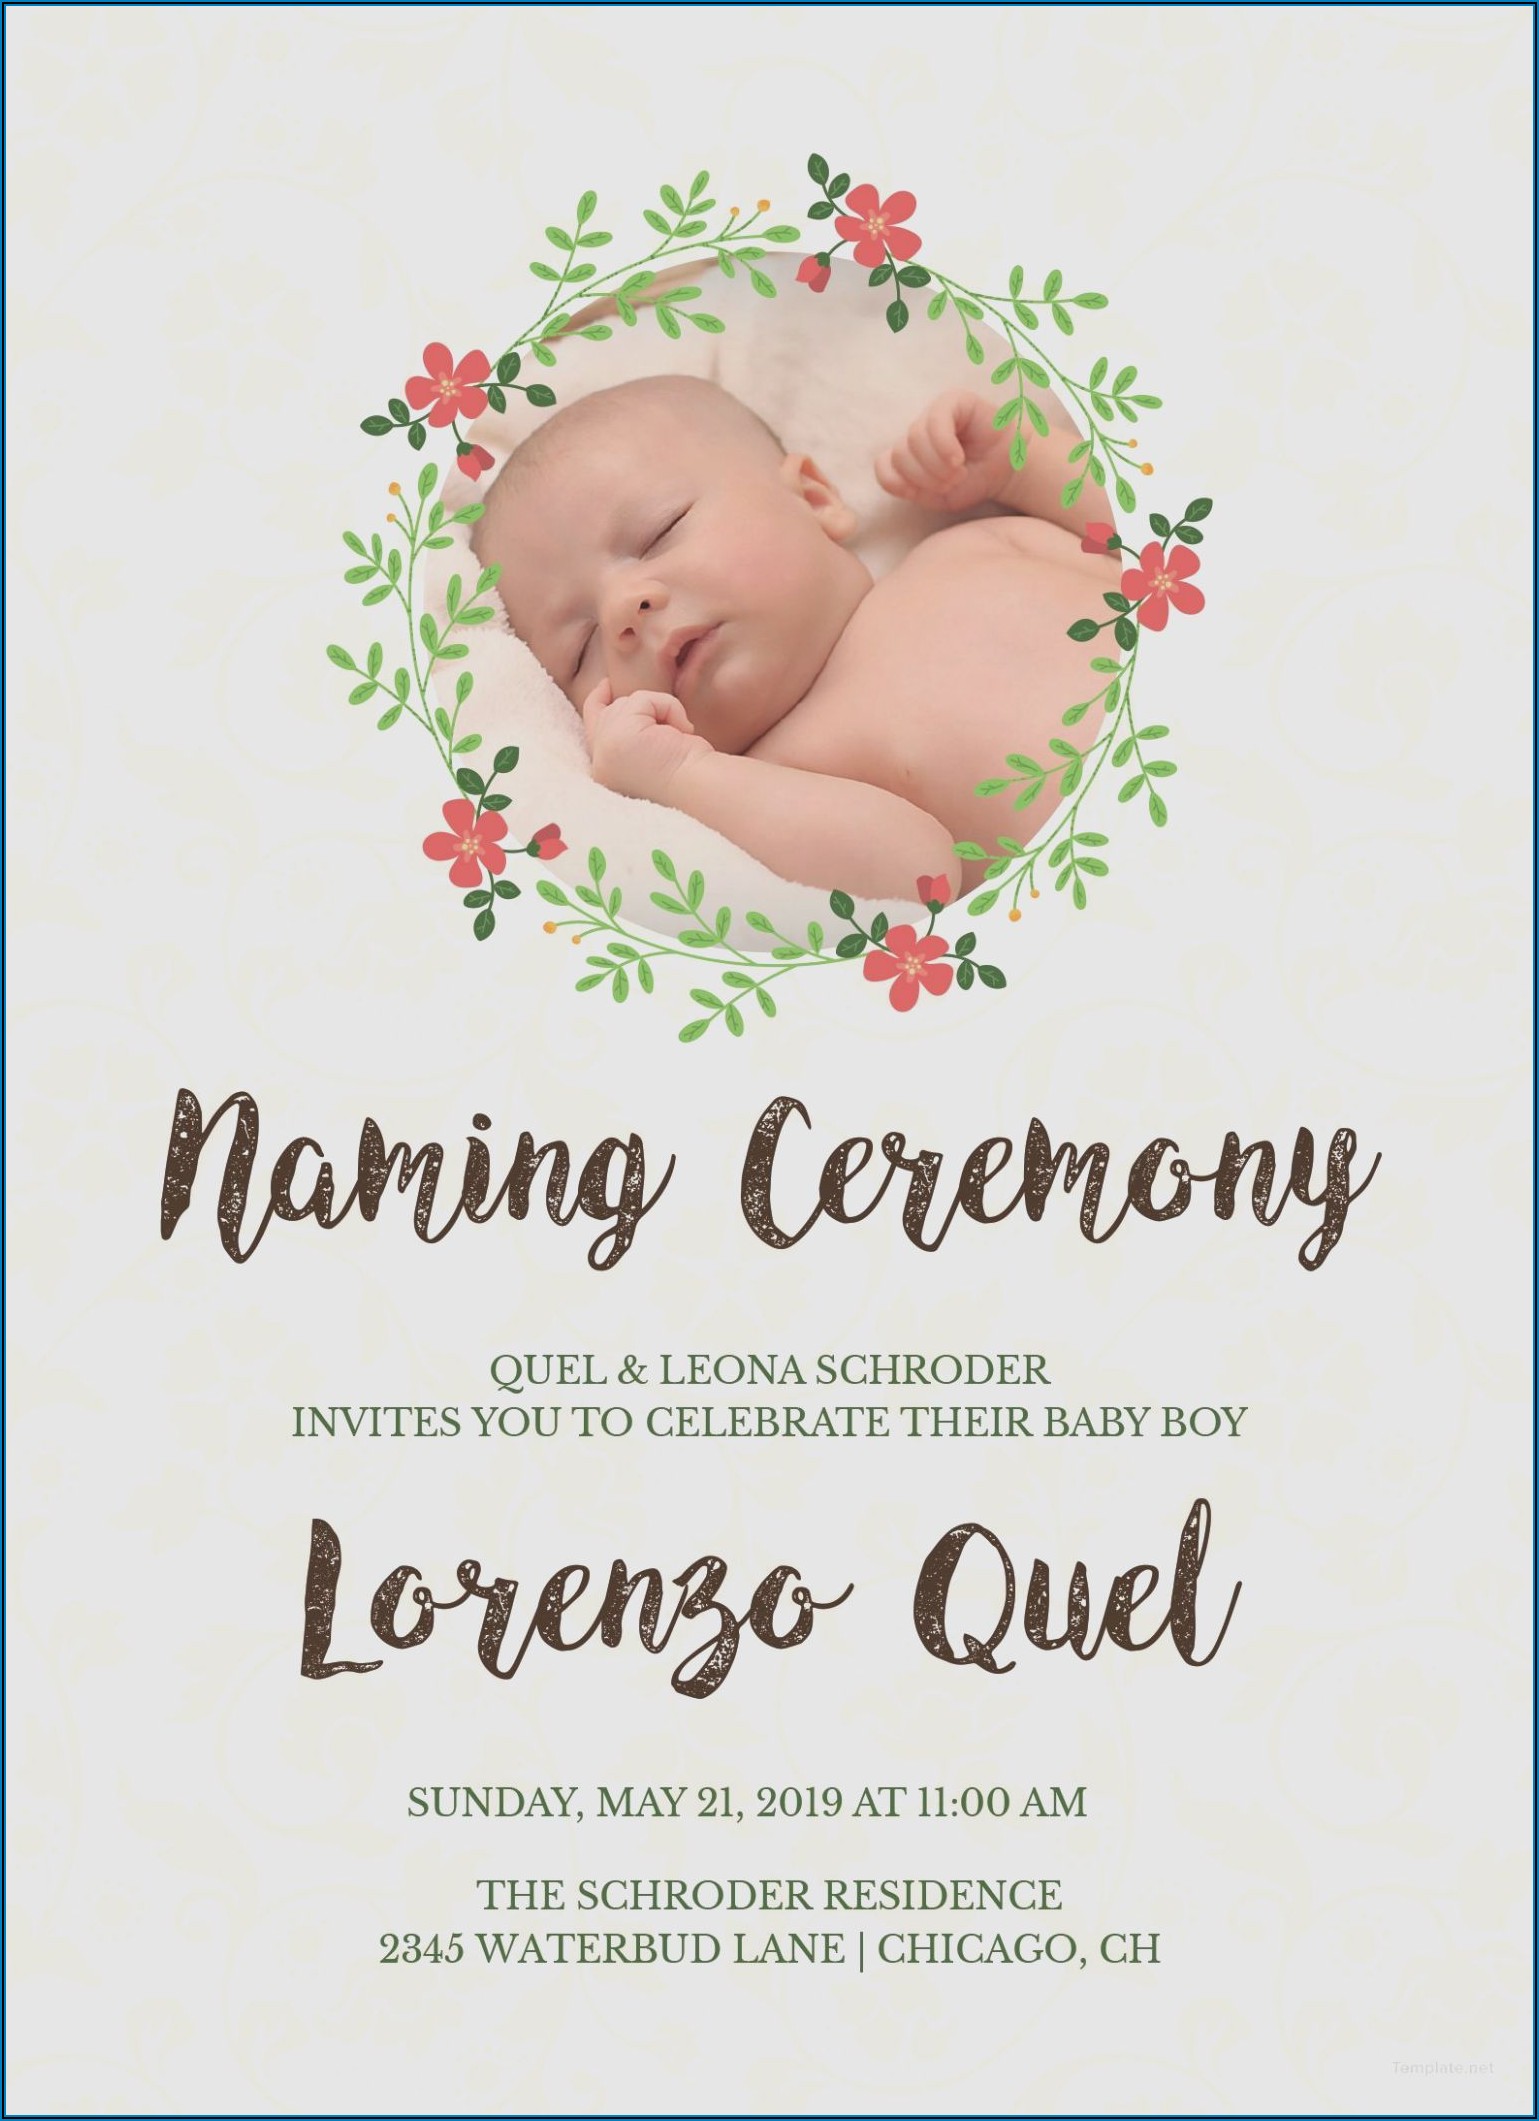 Naming Ceremony Invitation Card Template Free Download In Kannada